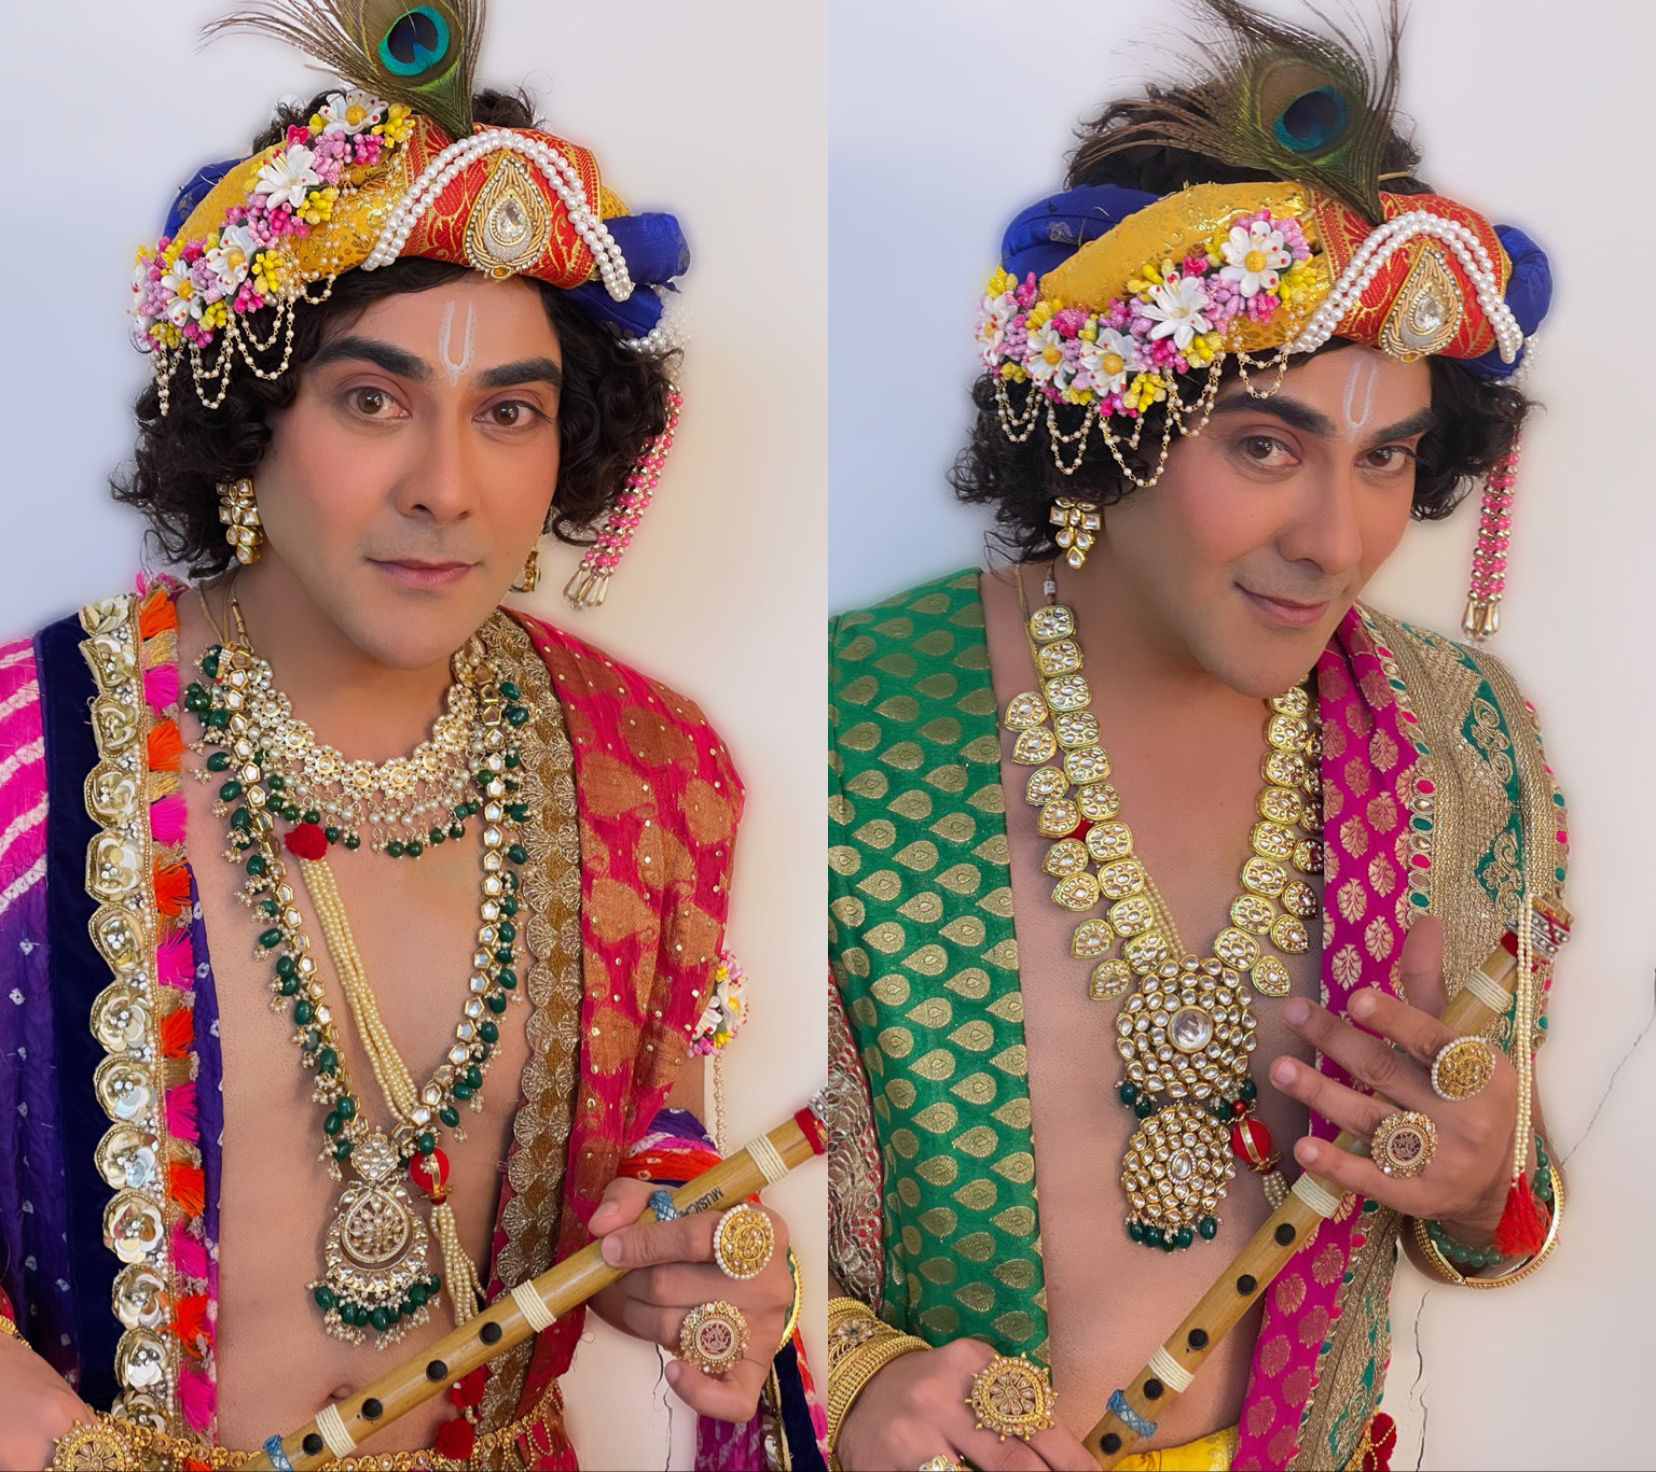 With his Krishna look, the actor worship Khanna, attracting all attention from his fans